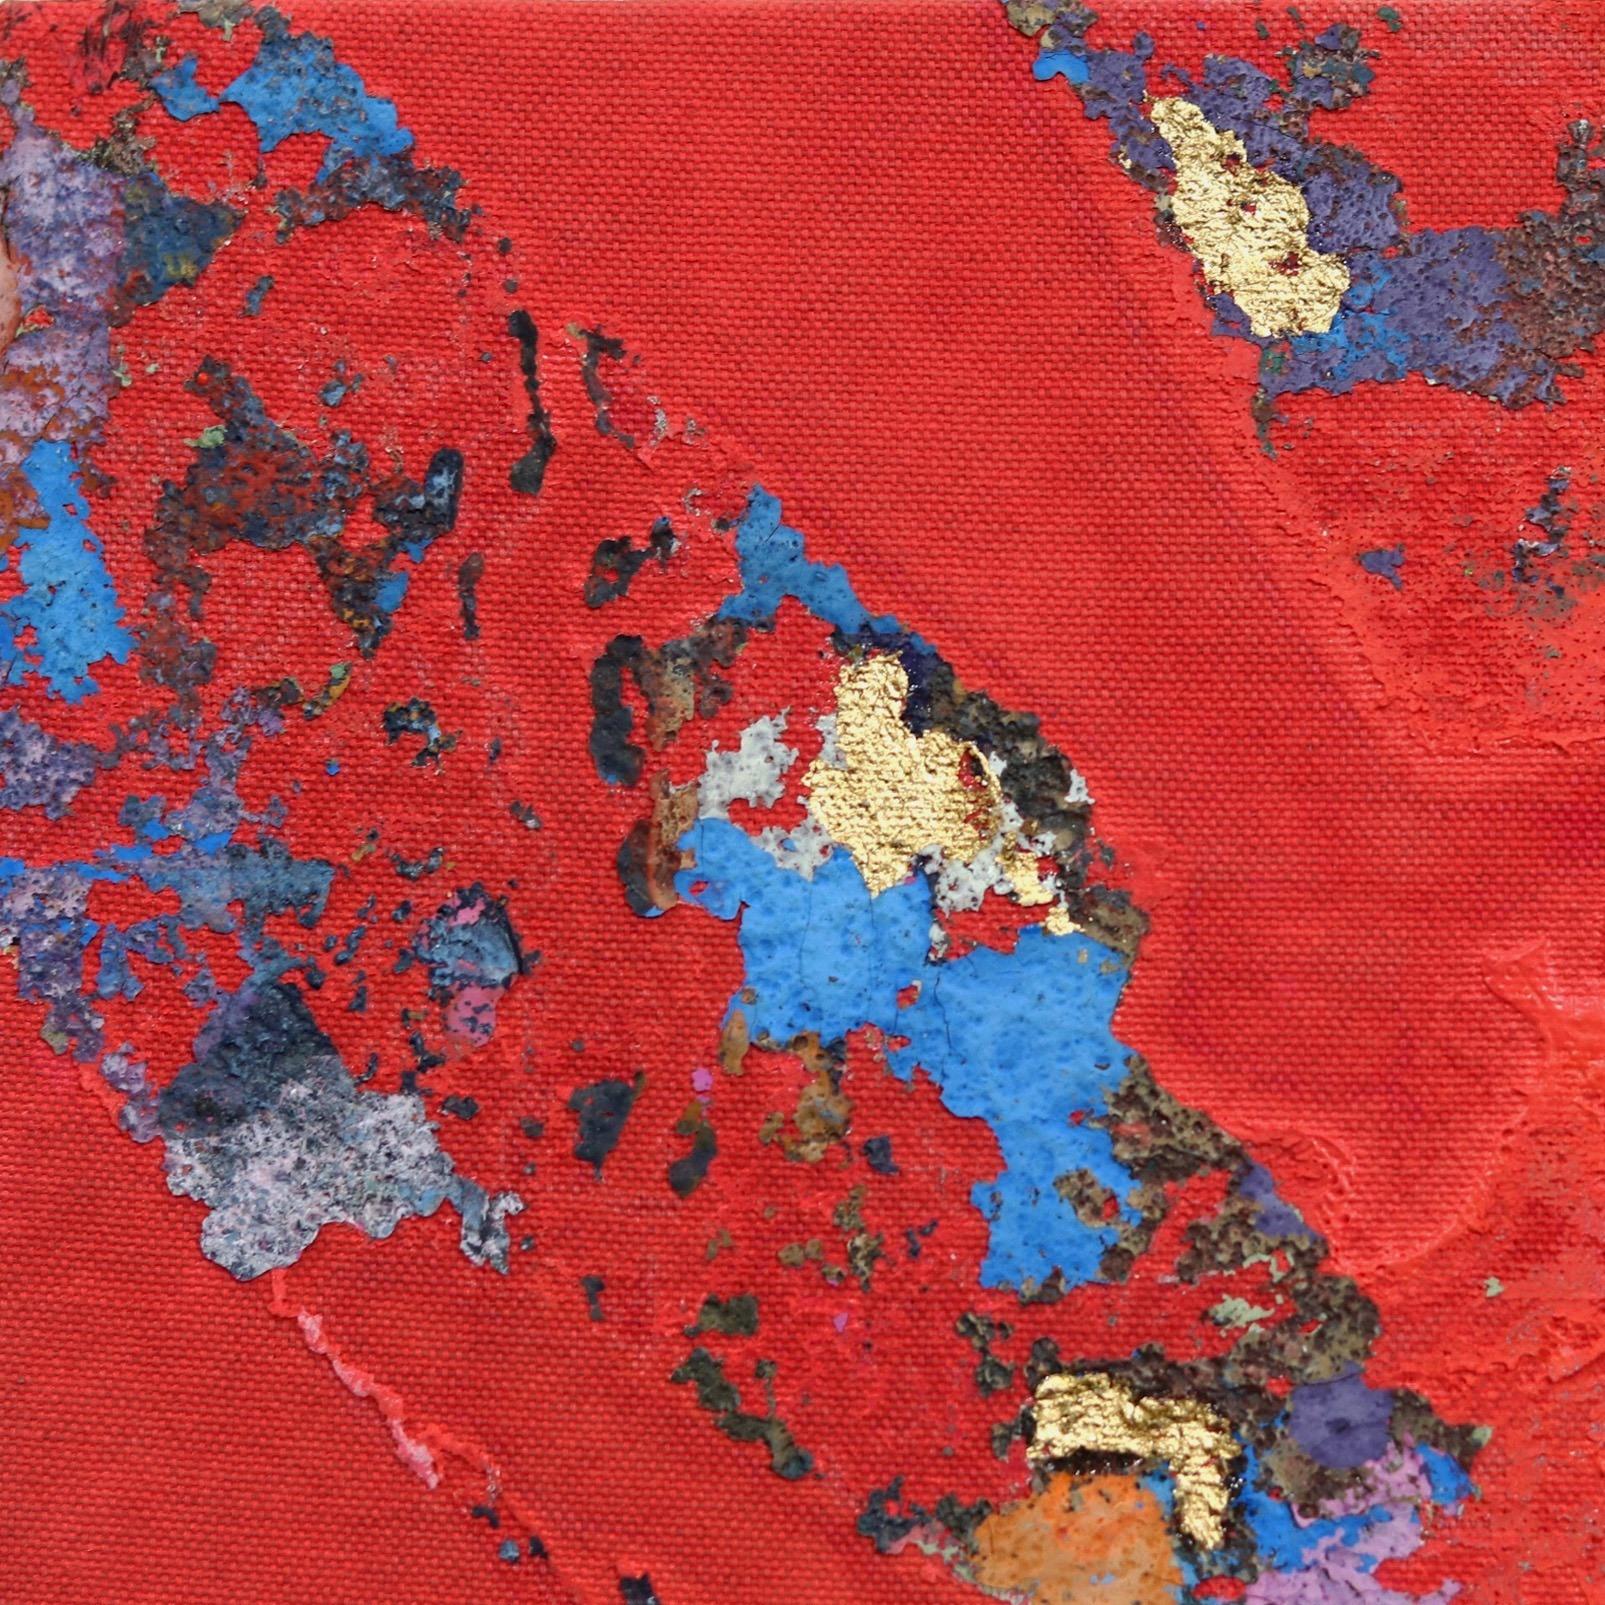 Concrete Sky I - Bold Meditative Gold Leaf Red Painting on Linen Canvas - Abstract Art by Jason DeMeo